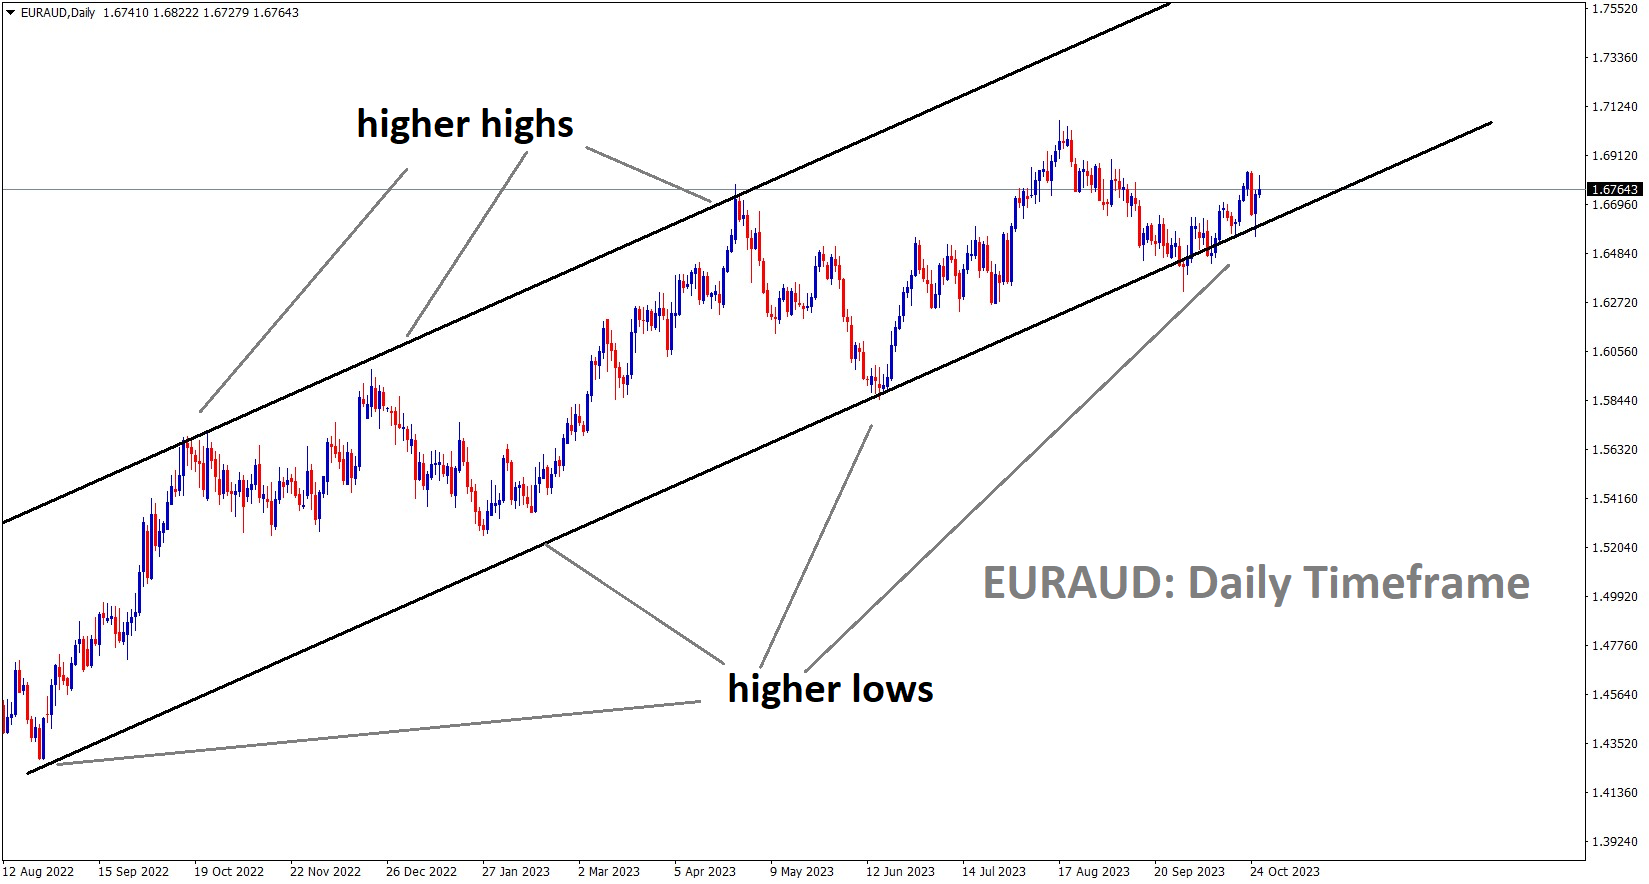 EURAUD is moving in an Ascending channel and the market has rebounded from the higher low area of the channel